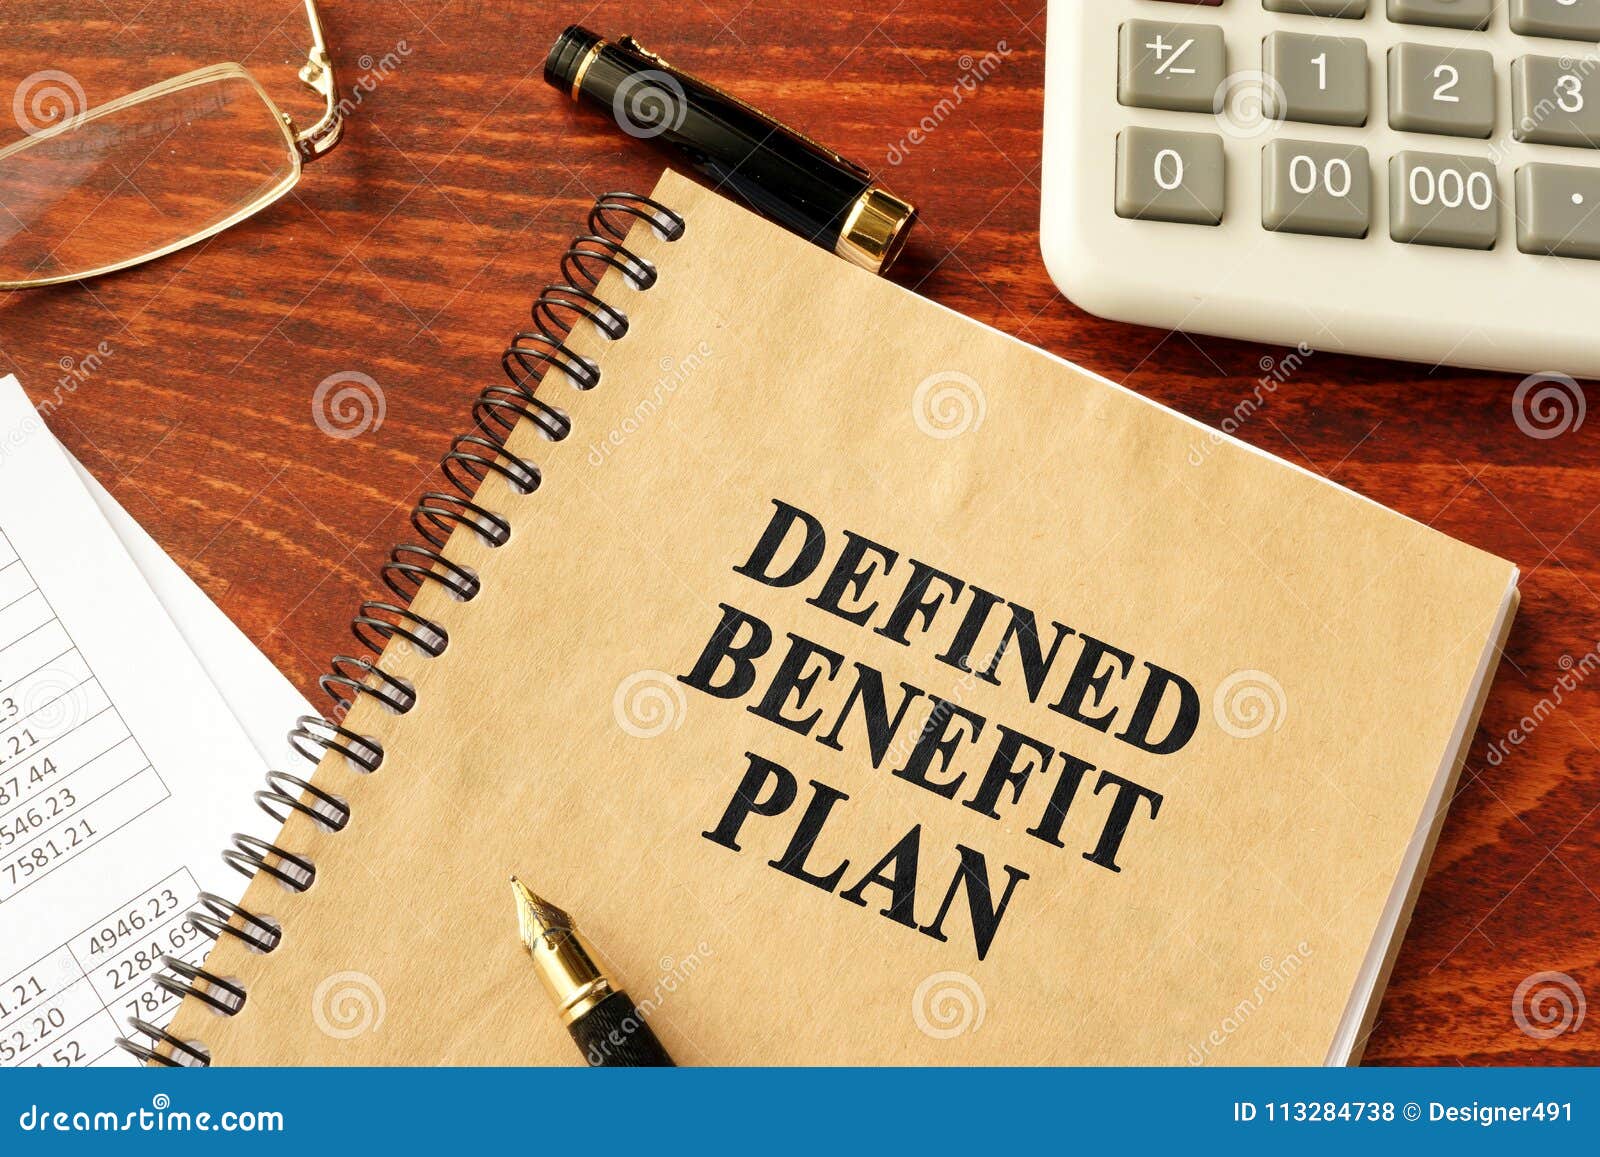 book with title defined benefit plan.